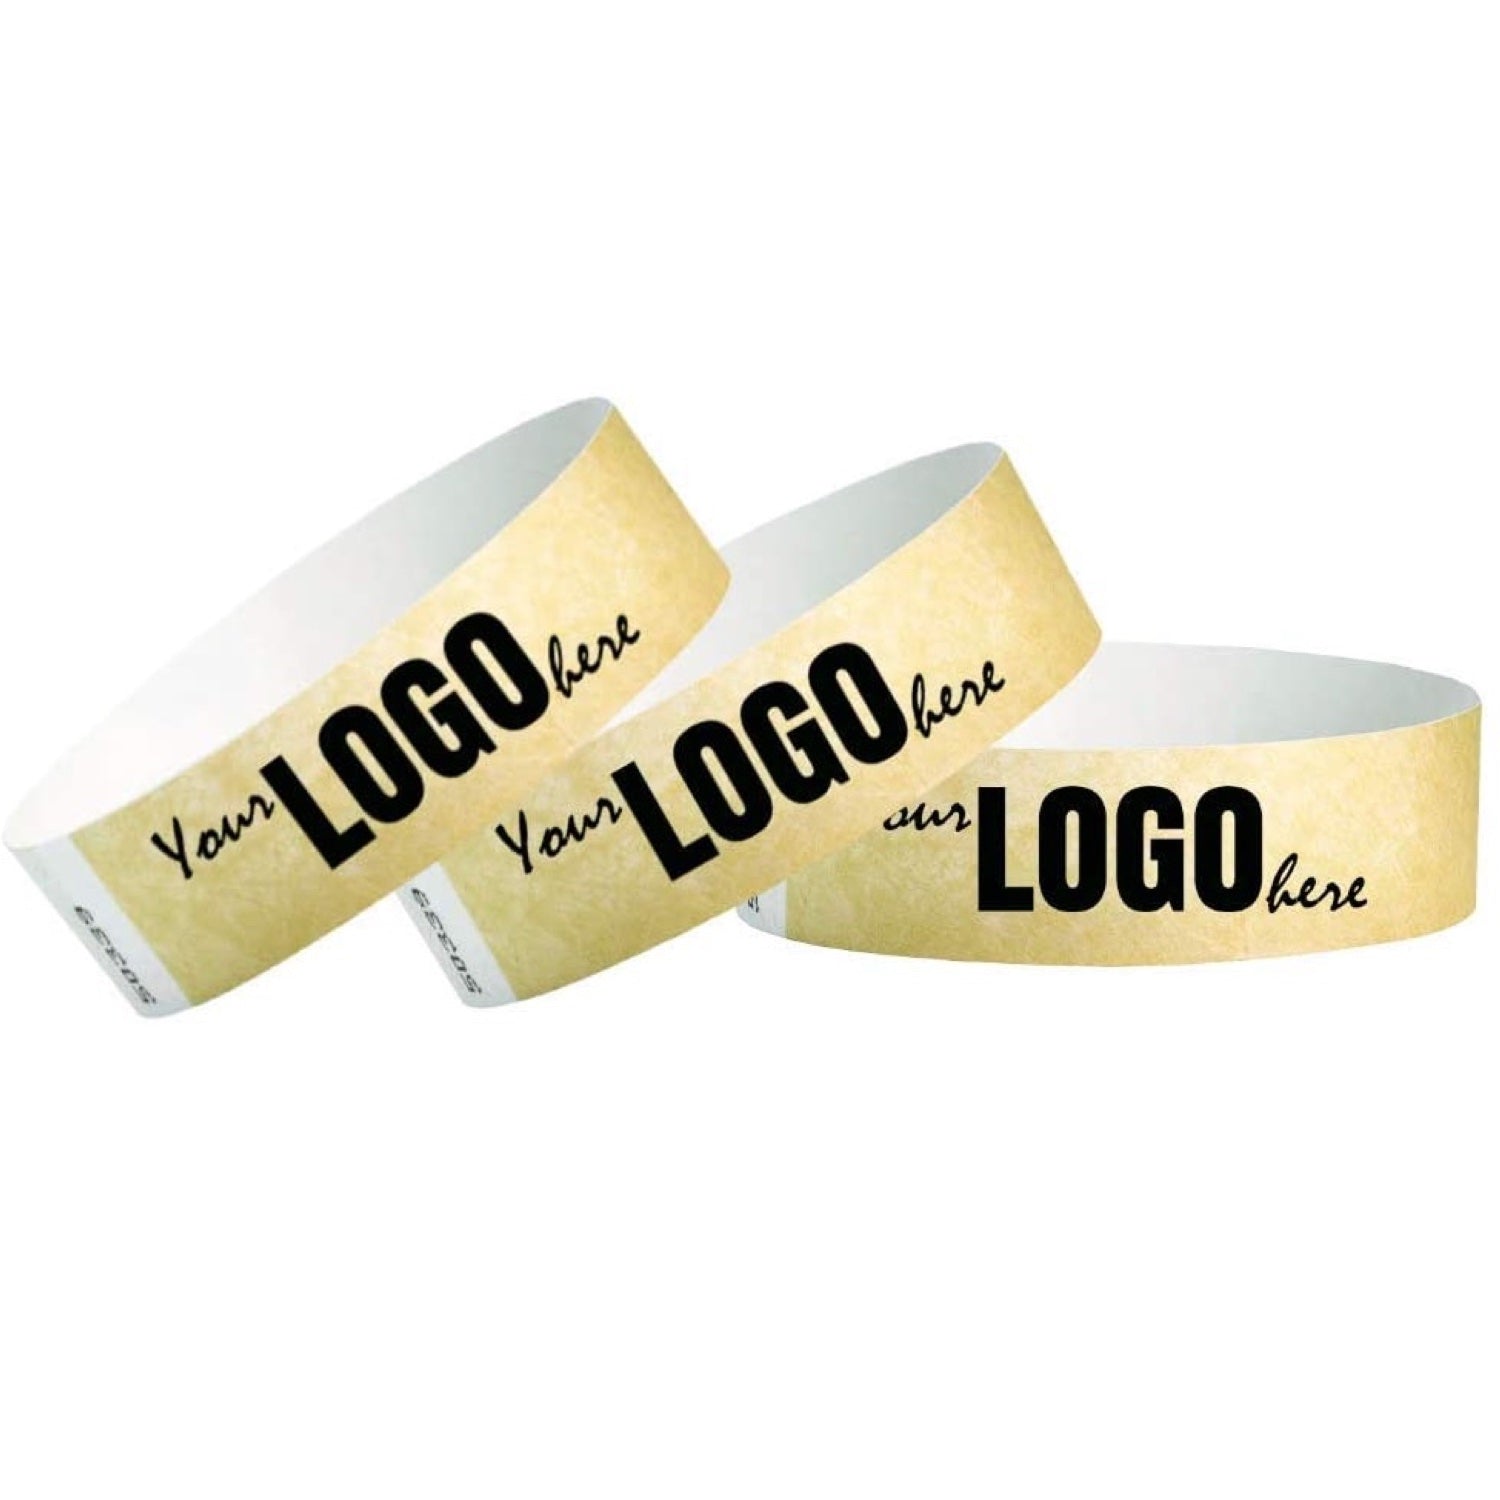 Custom 3/4 inch Tyvek Wristbands for Events - Image or Logo Personalized (Paper-Like) Bracelets - 1,000 Count